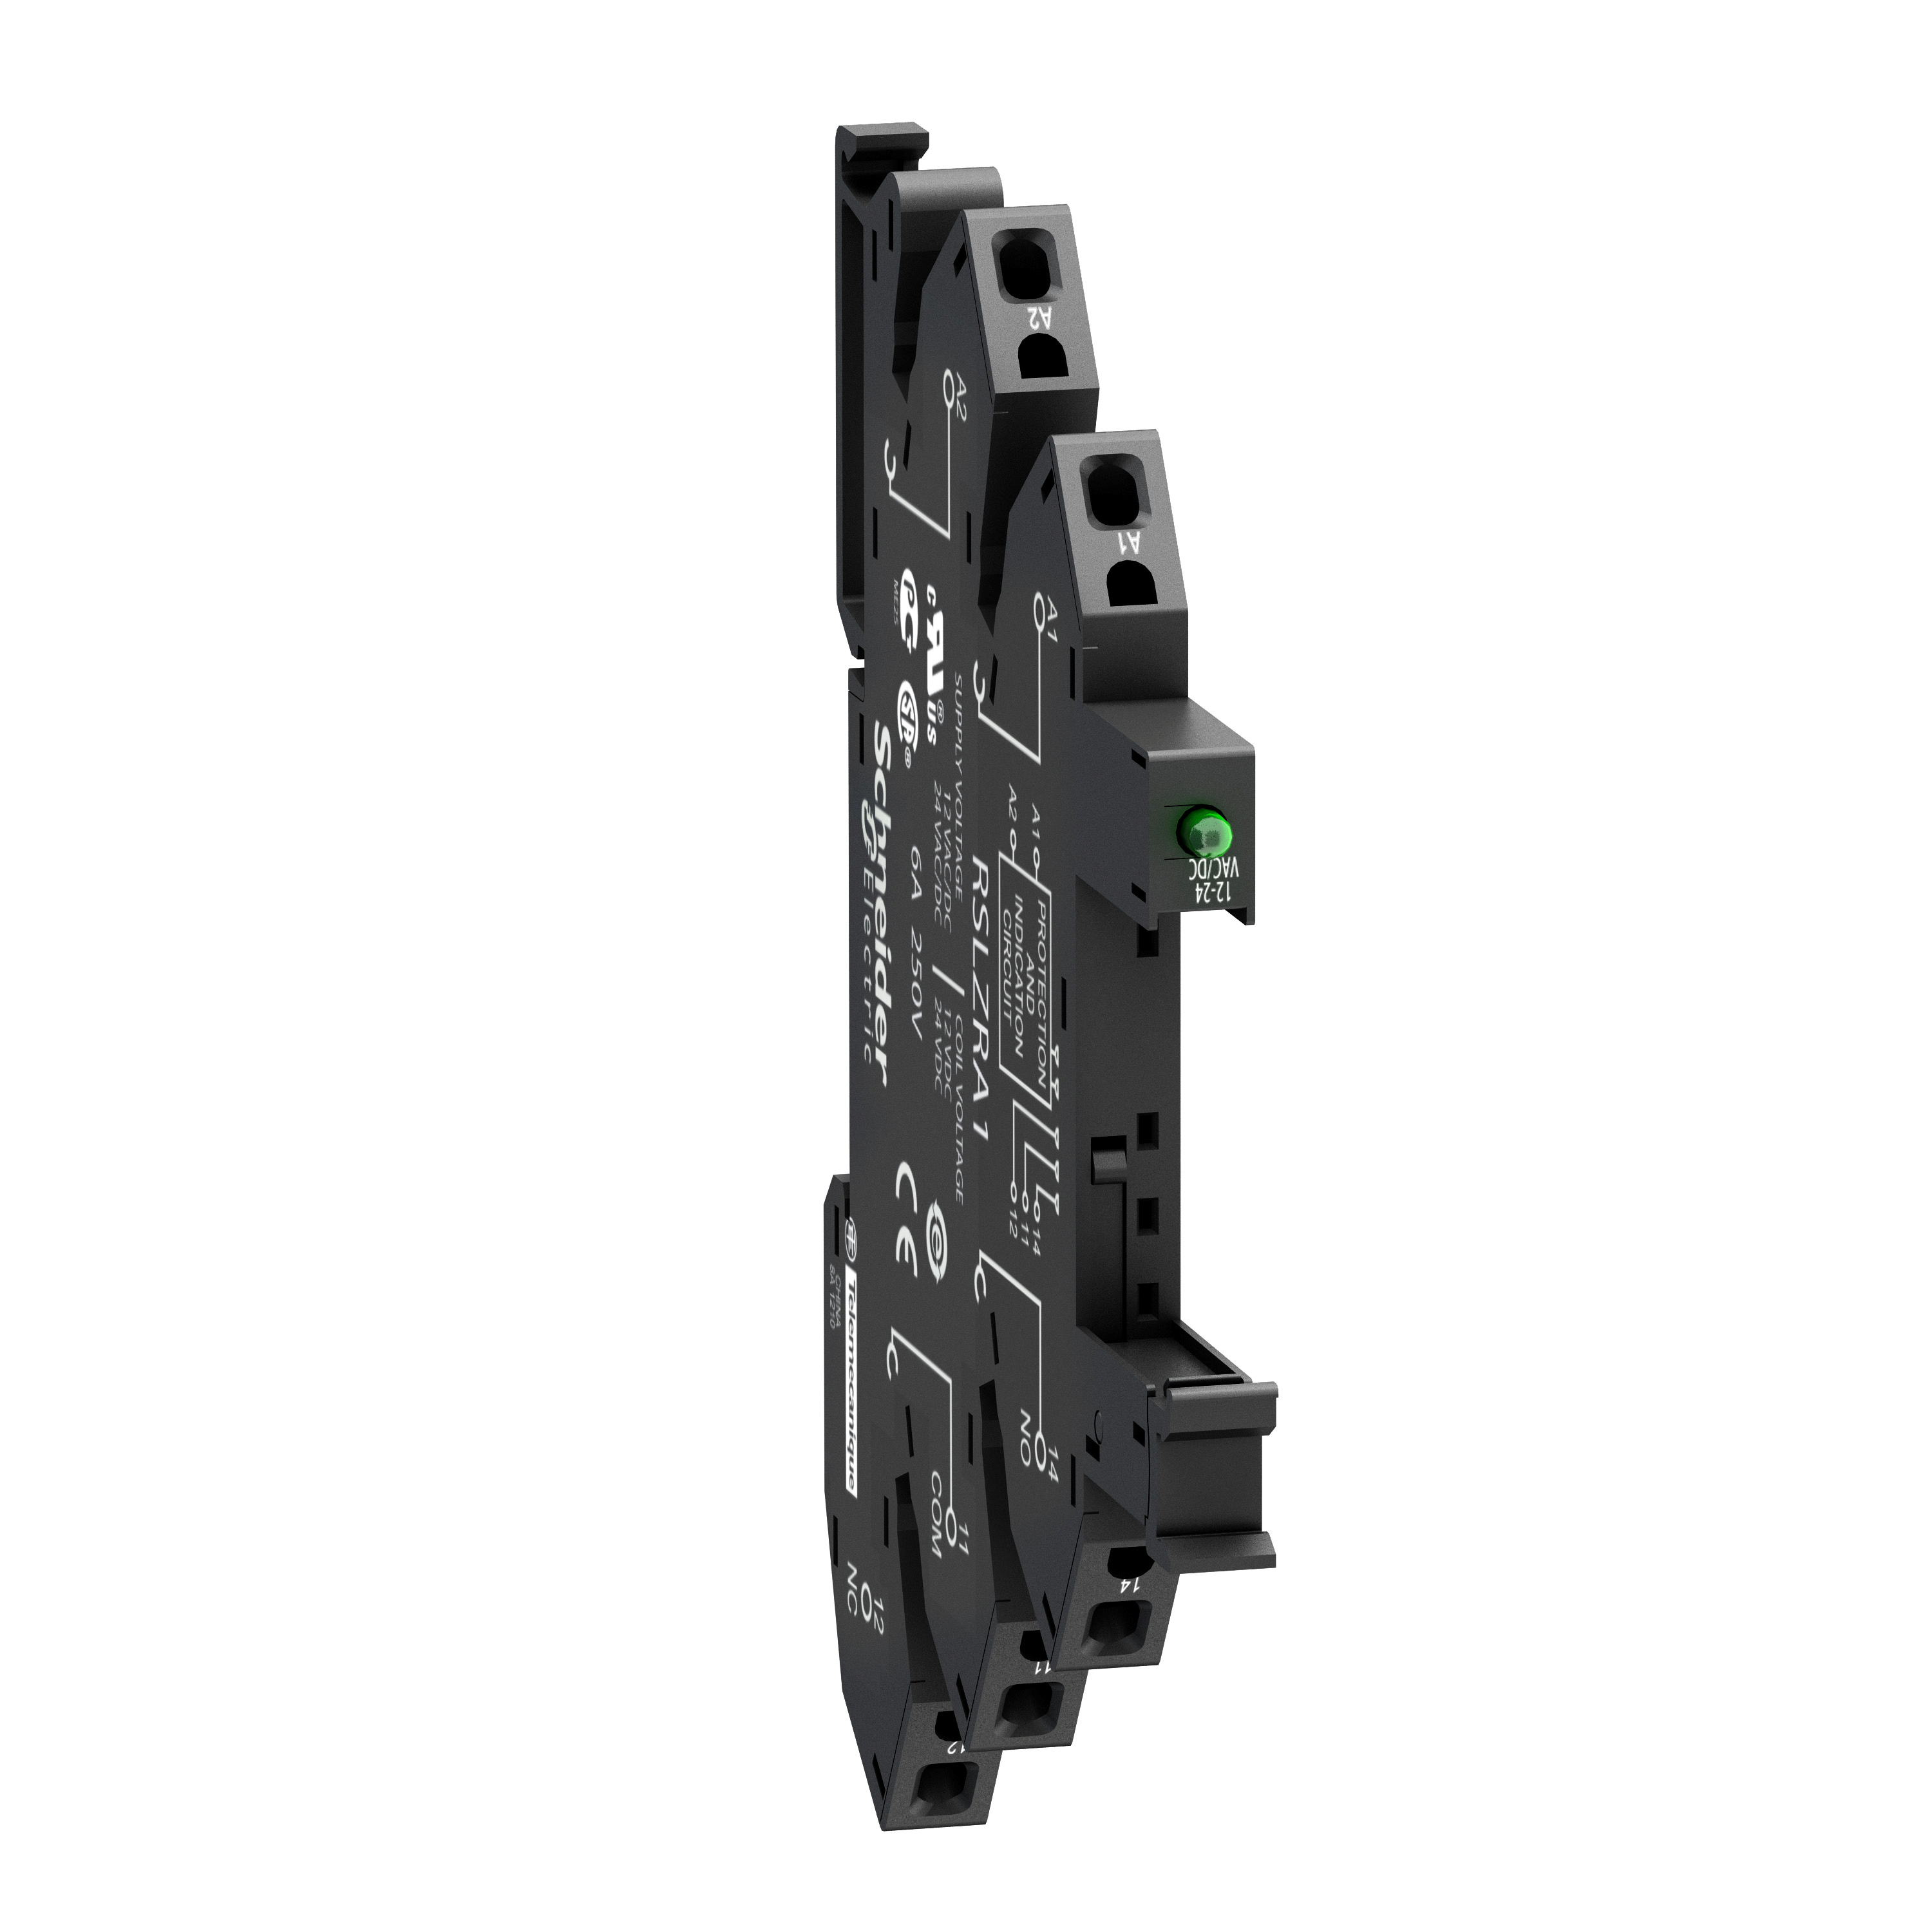 socket equipped with LED and protection circuit, Harmony Electromechanical Relays, for RSL1 relays, spring terminals, 230V AC DC